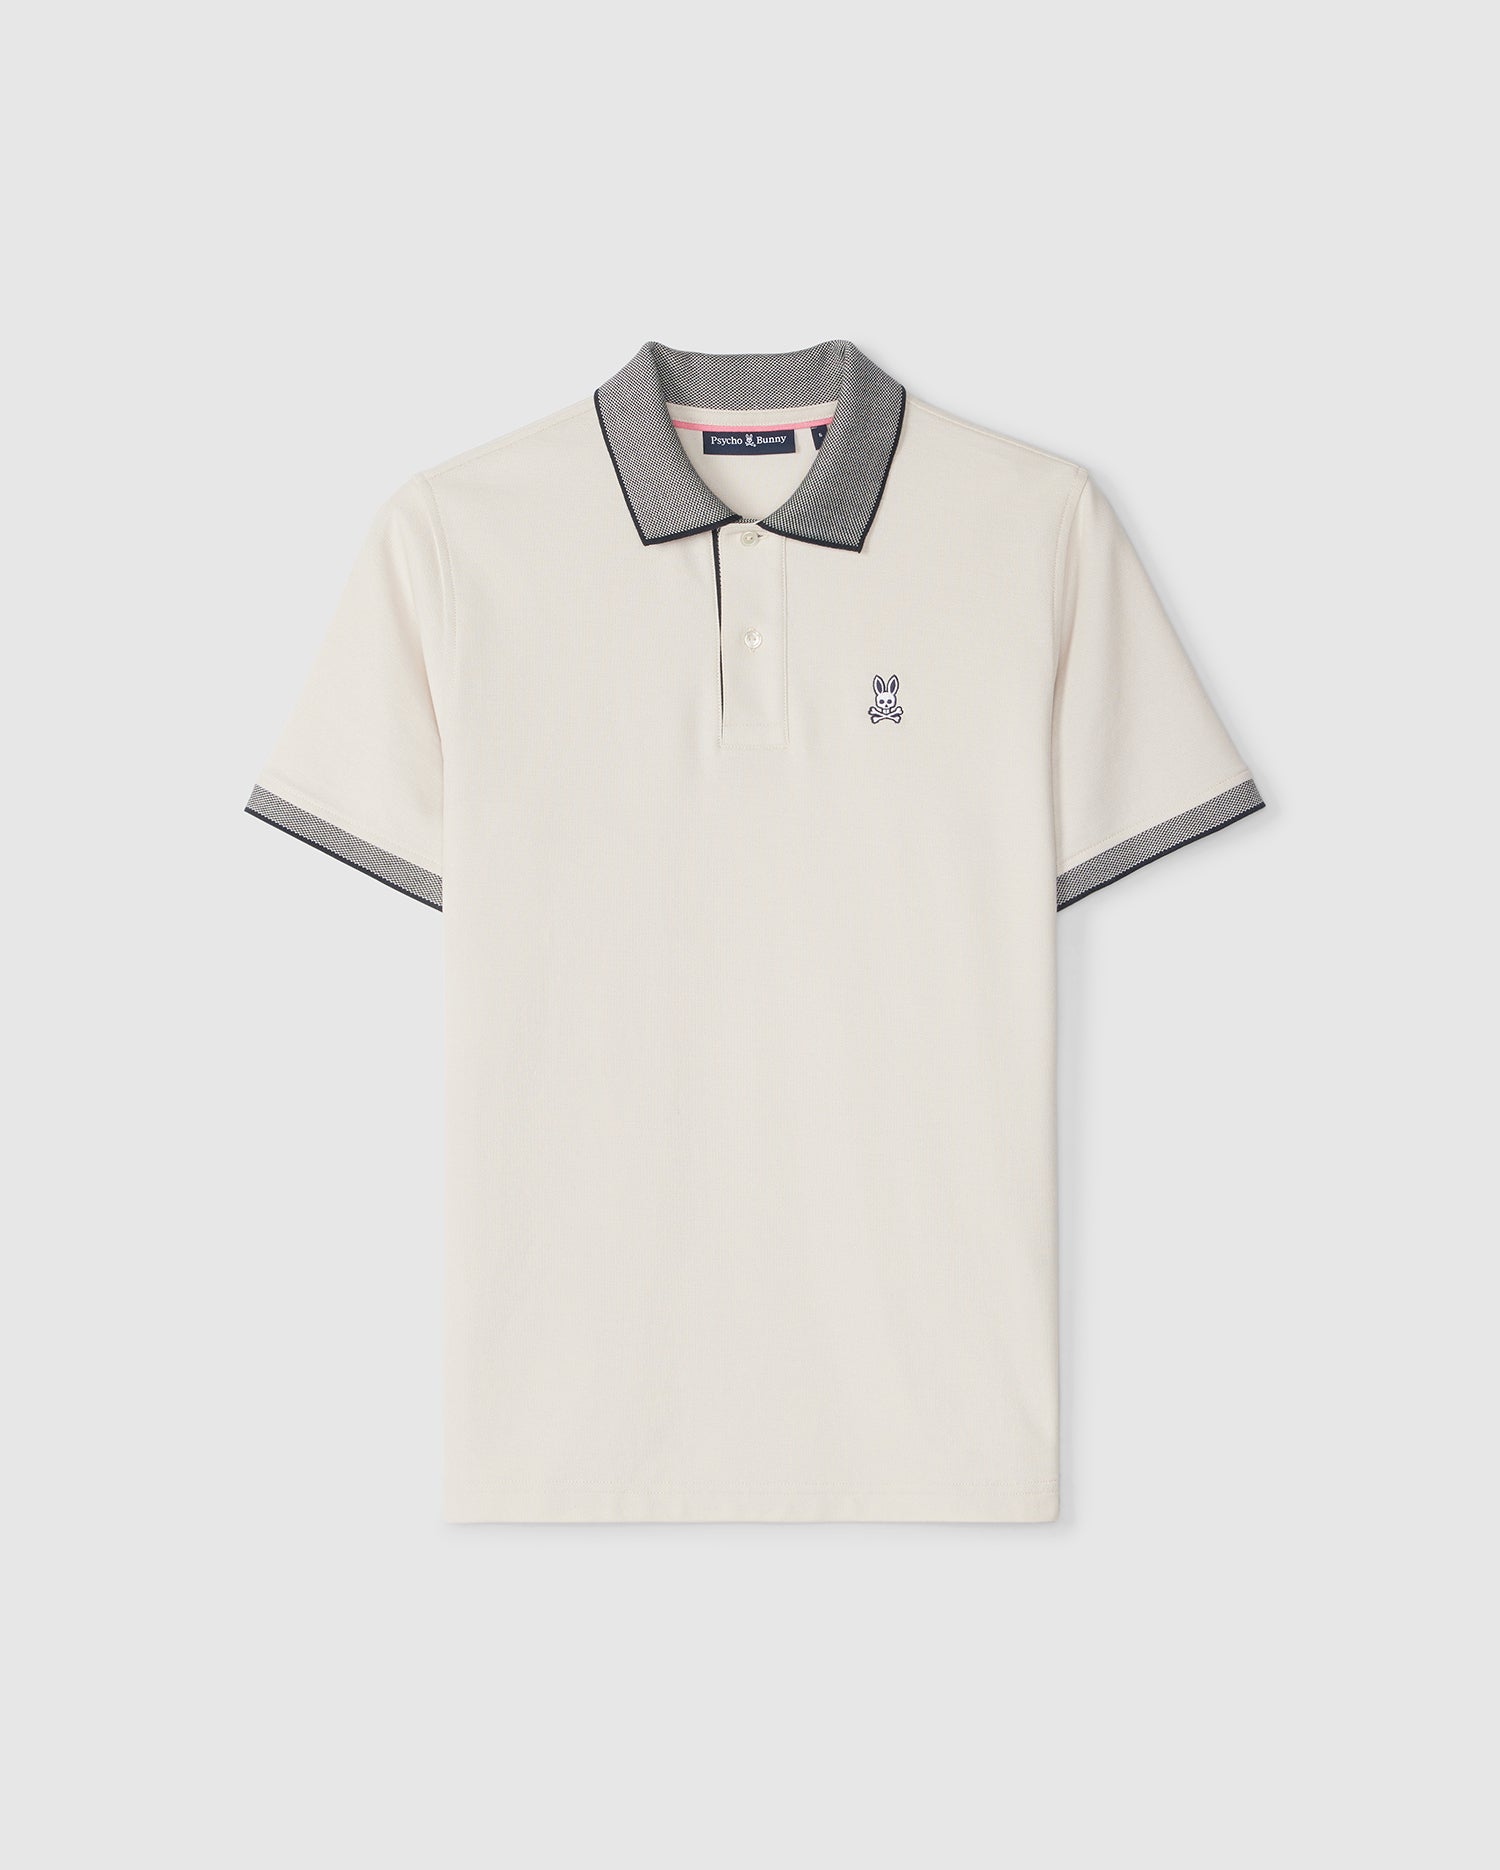 A cream-colored Psycho Bunny men's Southport pique polo shirt with a gray collar and sleeve trim, featuring a small embroidered logo on the left side of the chest. The shirt is displayed against a plain light background.